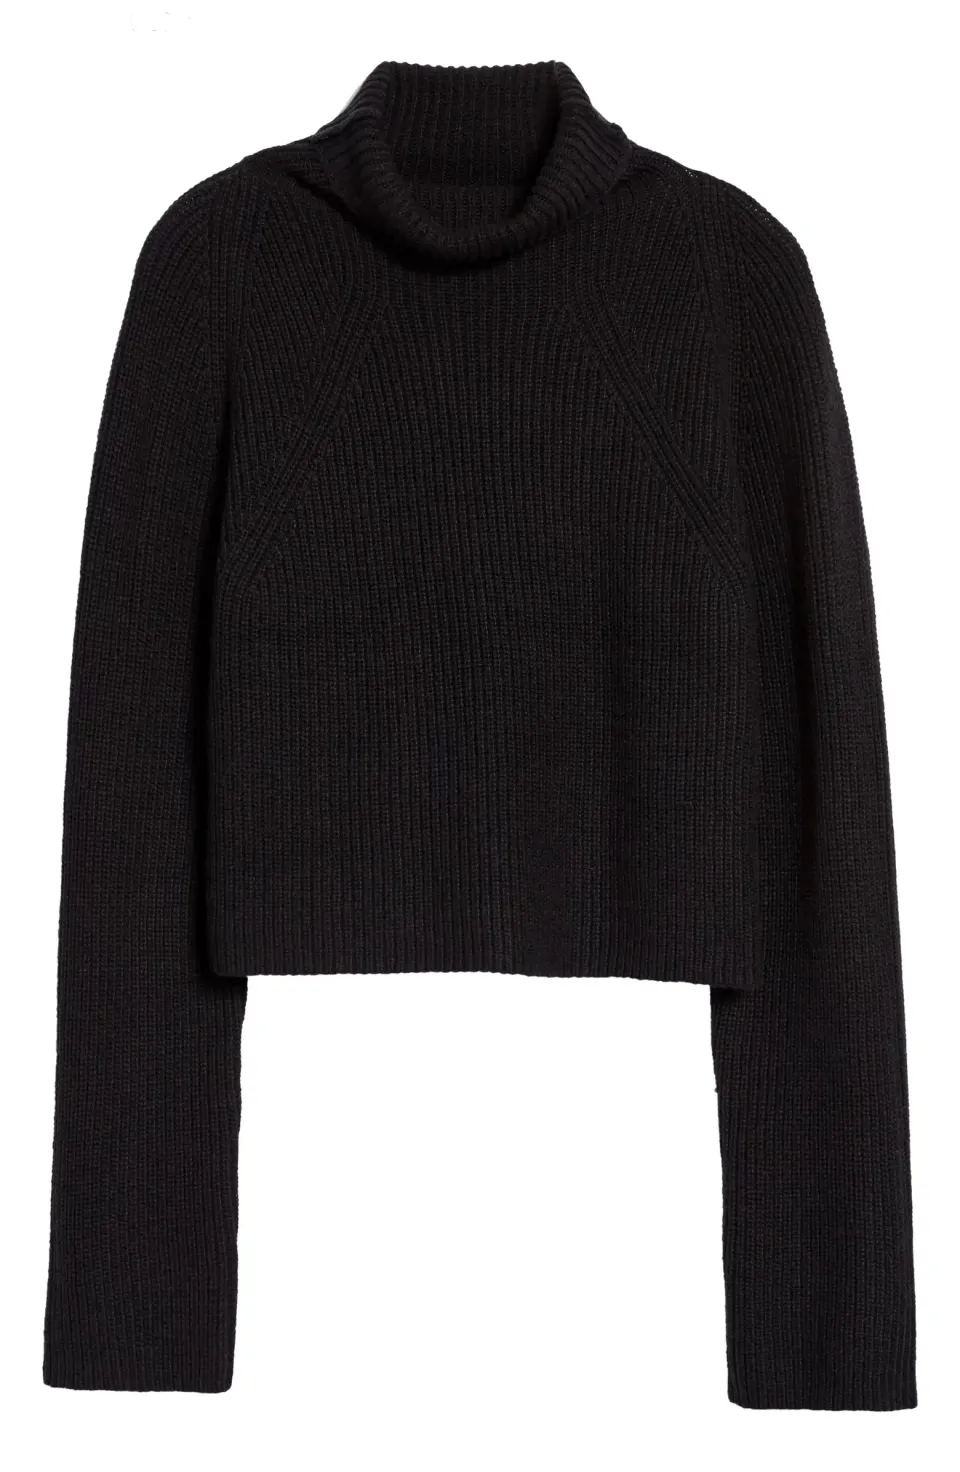 25 Cozy Sweaters Under $60 Perfect For This Fall | HuffPost Life